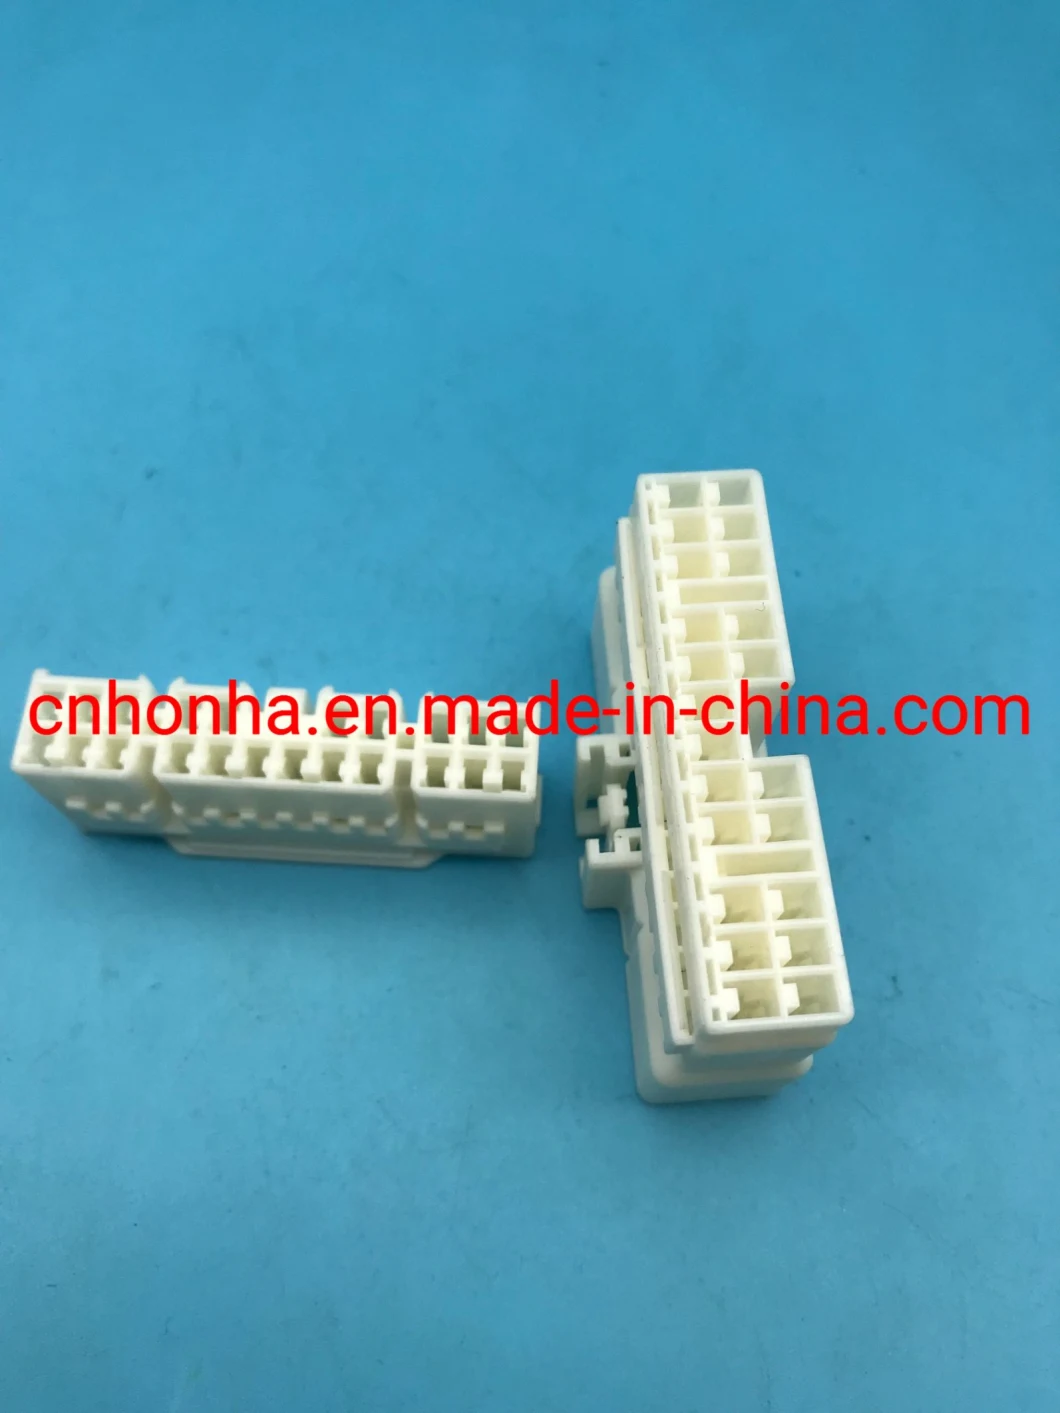 22 Pin Way Car and Motorcycle Connector Male (Mg641089) and Female (Mg651086) Harness